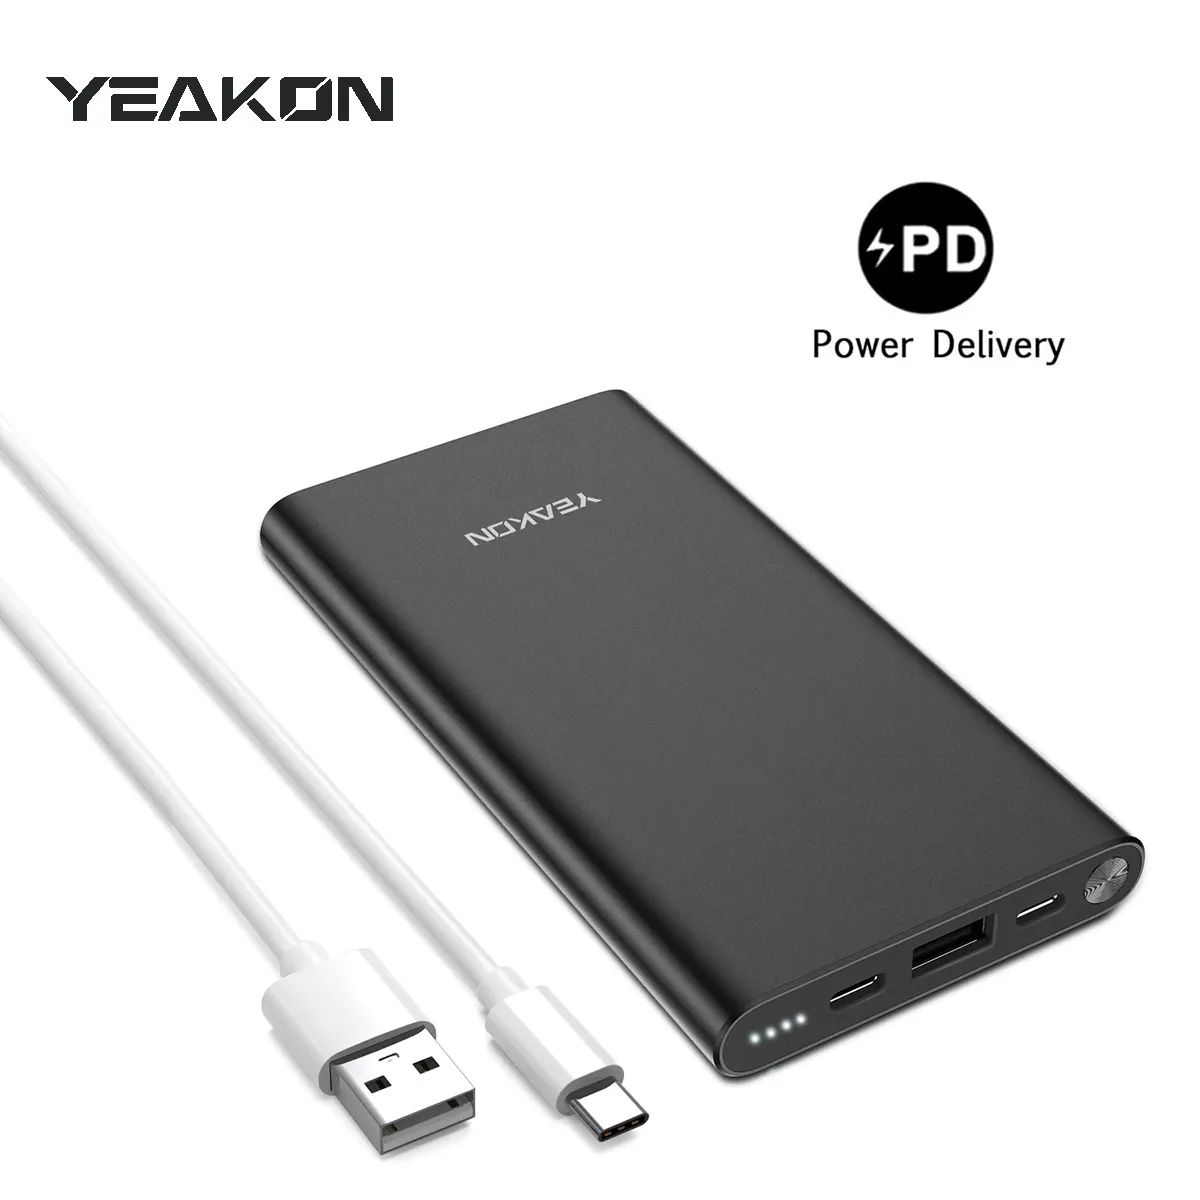 YEAKON 8 Pin Charging Port Power Bank 10000mAh Portable Charger QC 3.0 Quick Charge Back Up Battery for iPhone XS